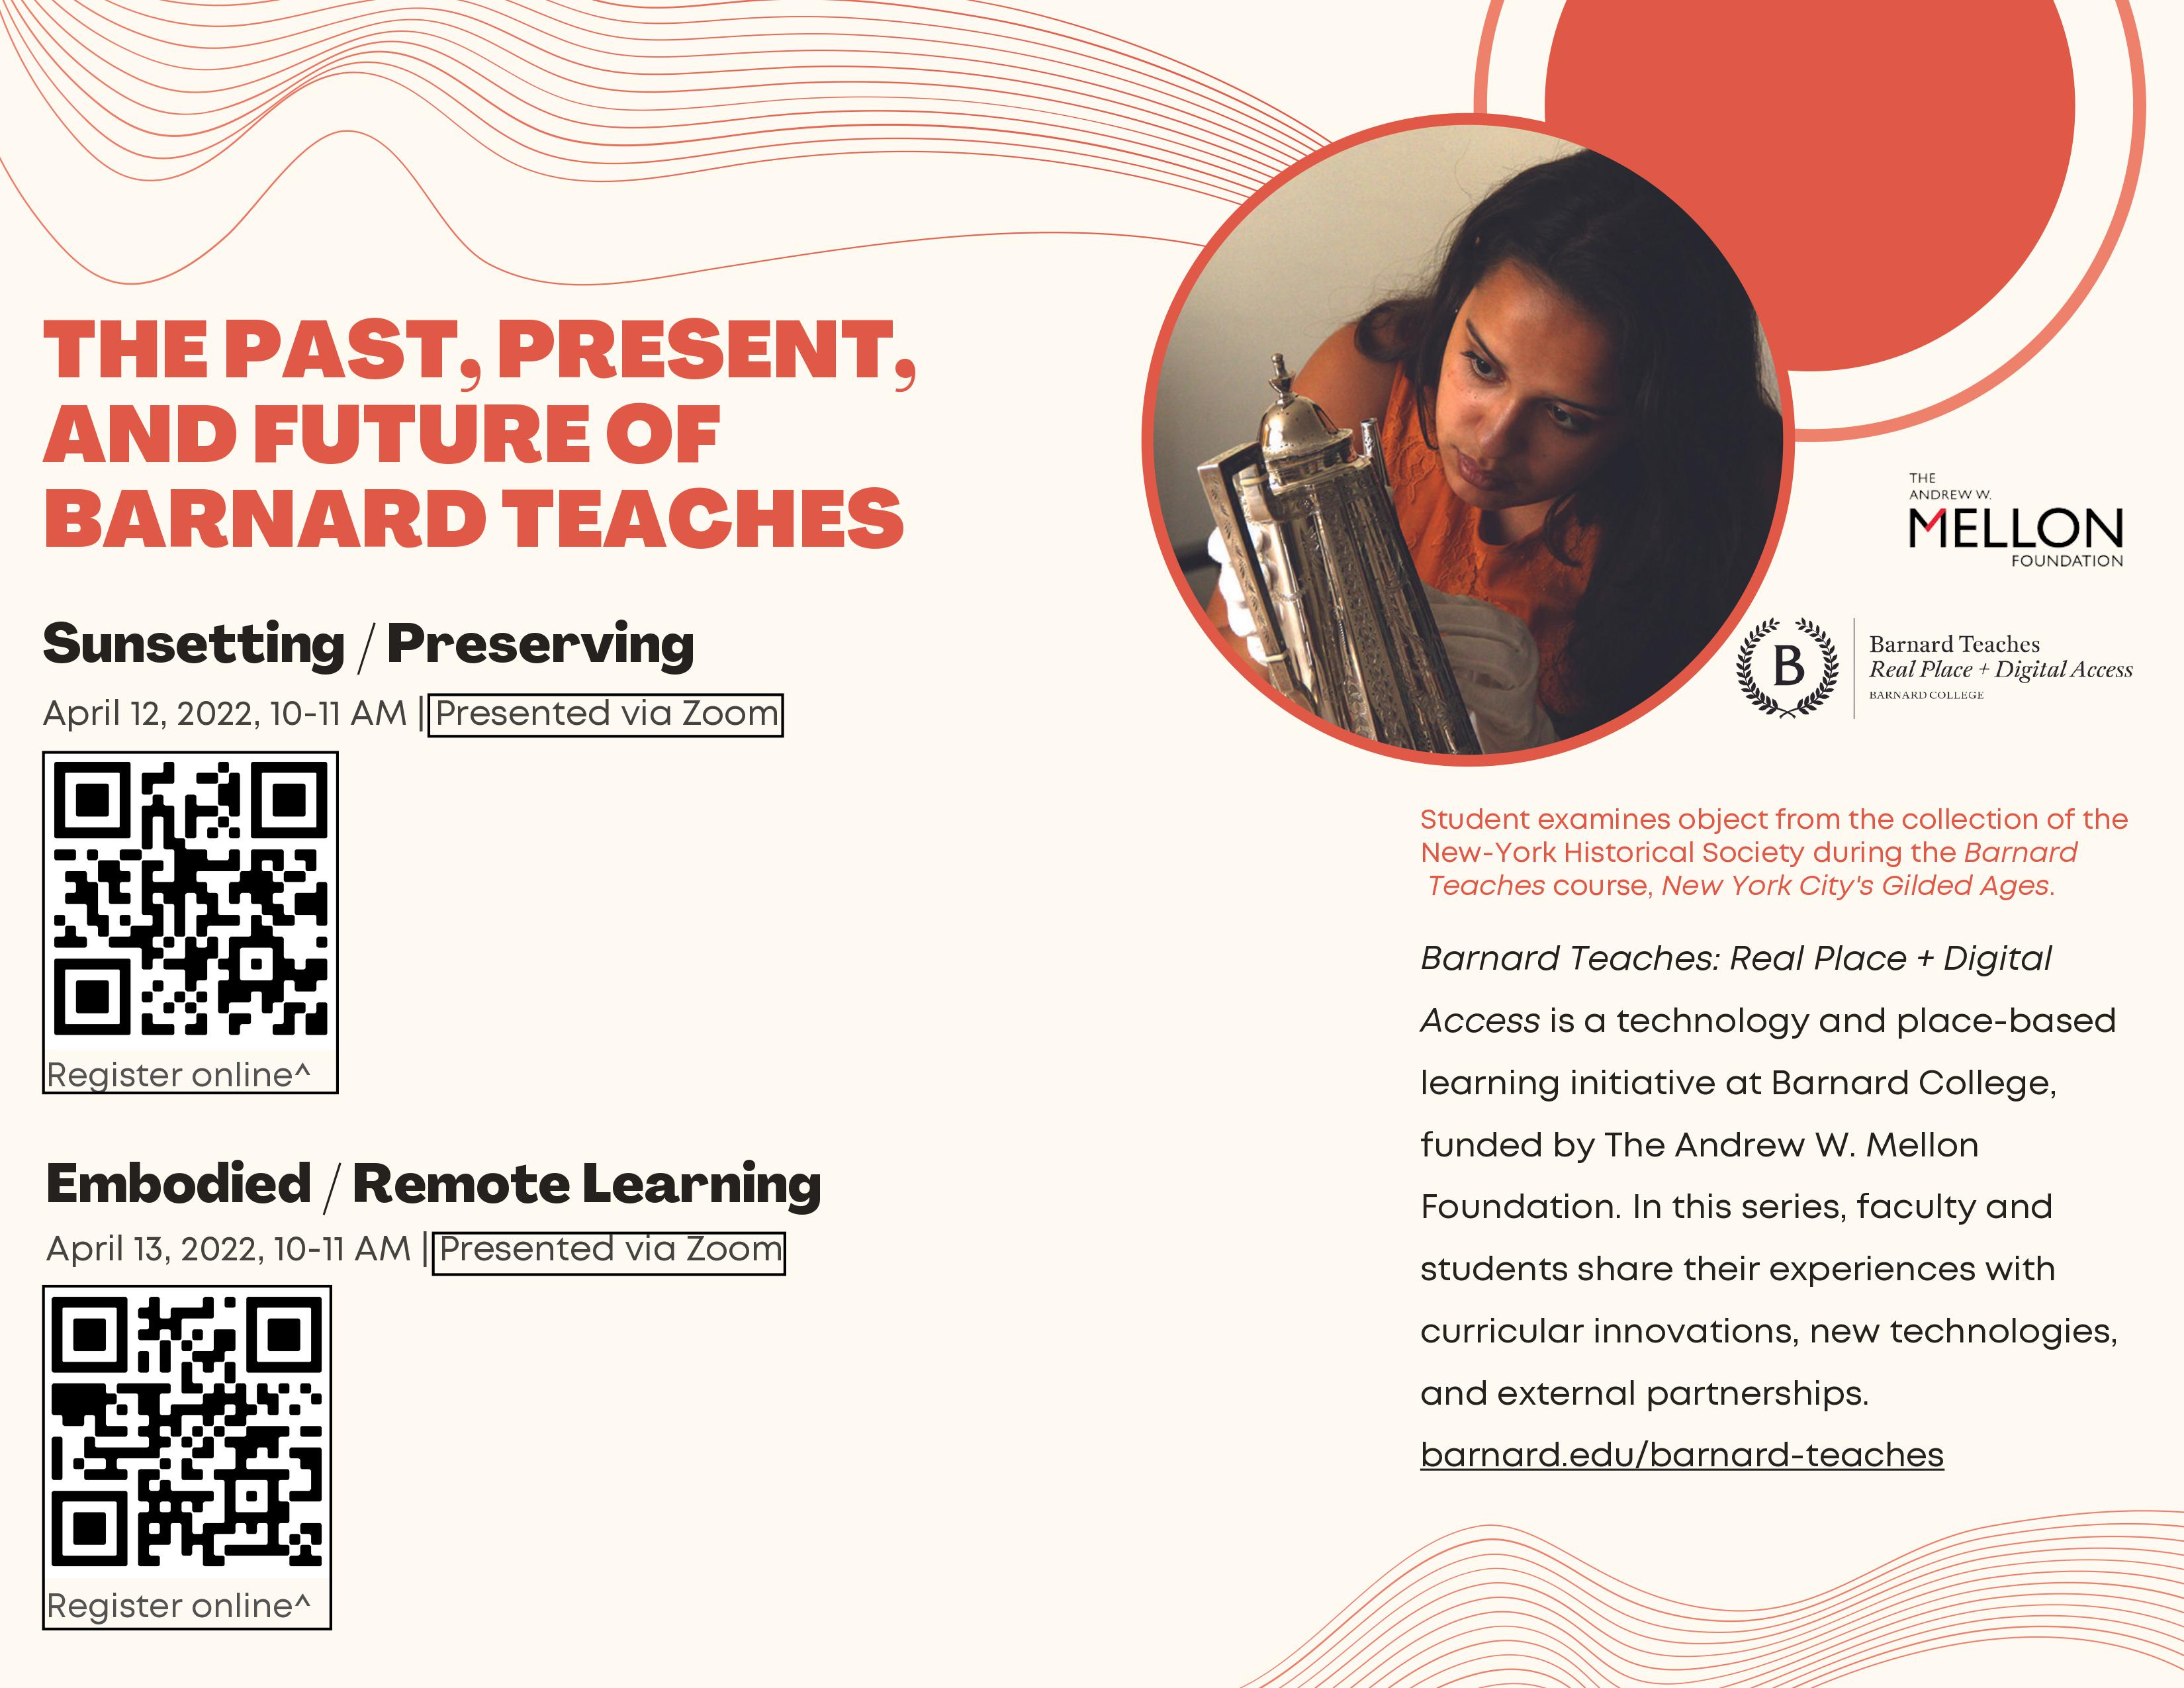 Flyer for Barnard Teaches Panel. Primary text reads The Past, Present, and Future of Barnard Teaches in bold orange font. Just below this, Sunsetting/ Preserving with a QR code and further, Embodied/ Remote Learning with another QR code. The right side of the flyer features a small image and brief text about the panel series.